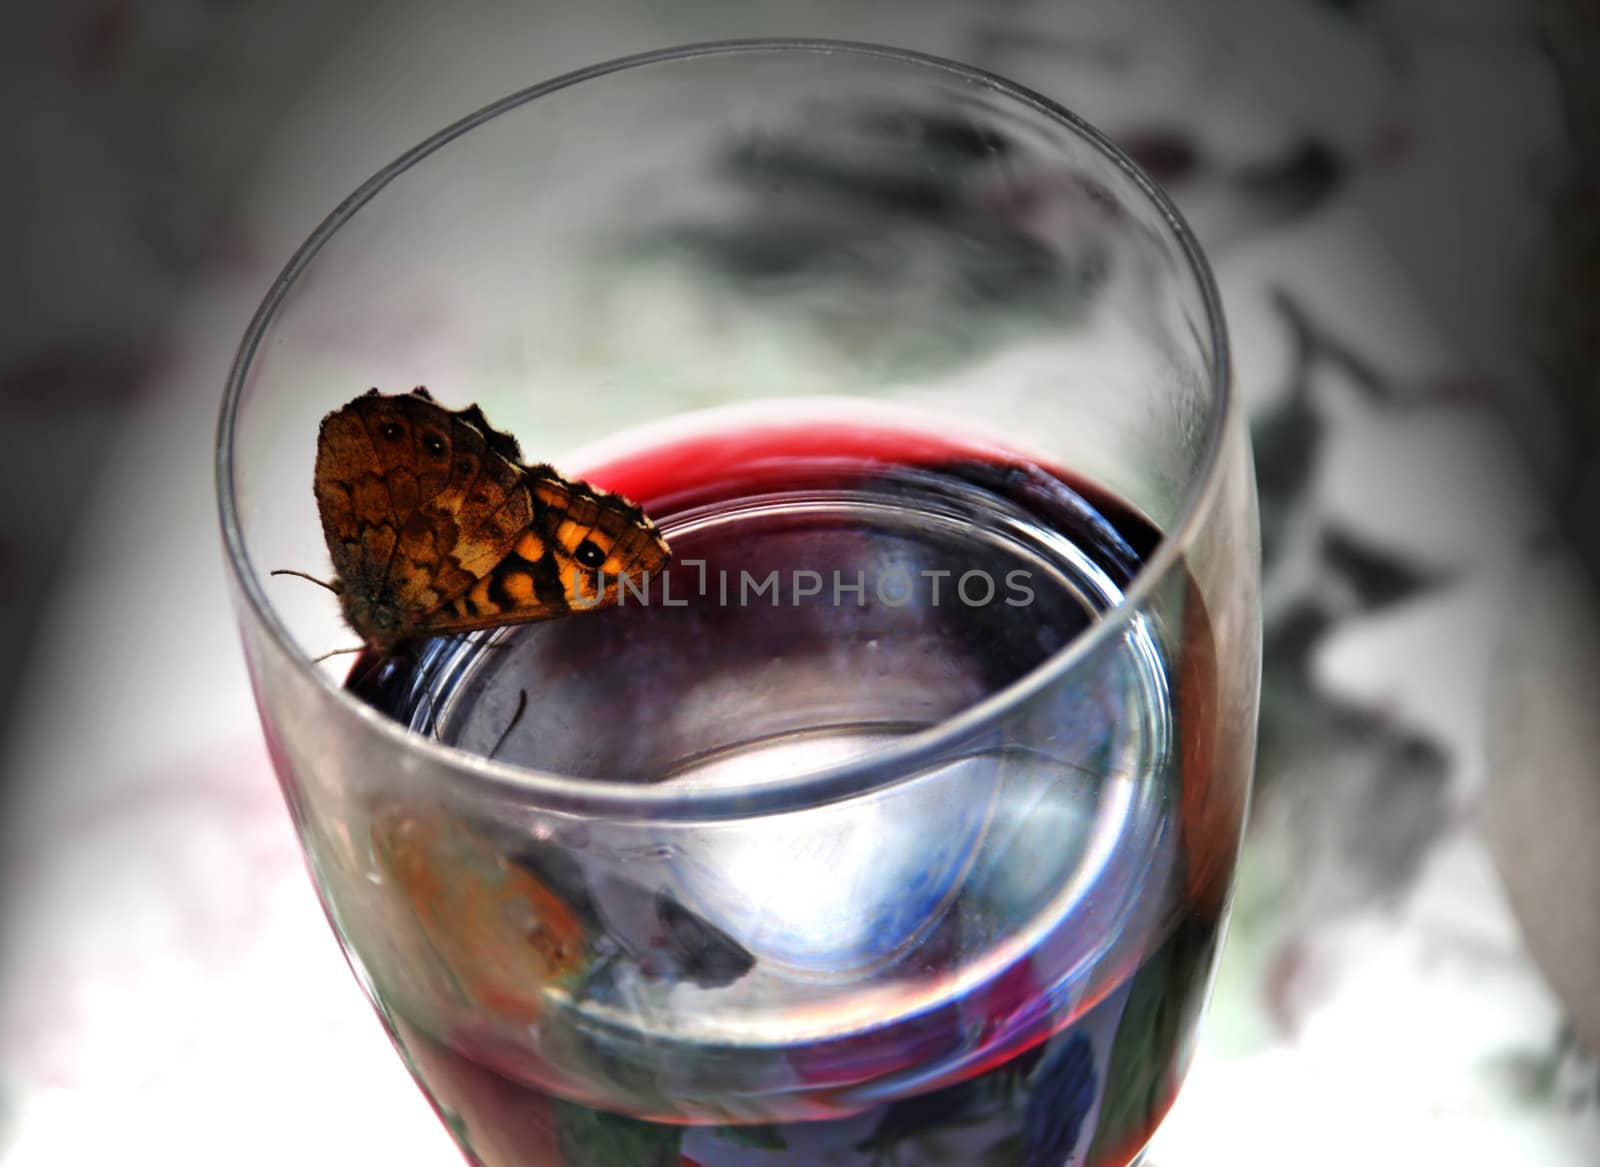 Butterfly drinking wine by simply